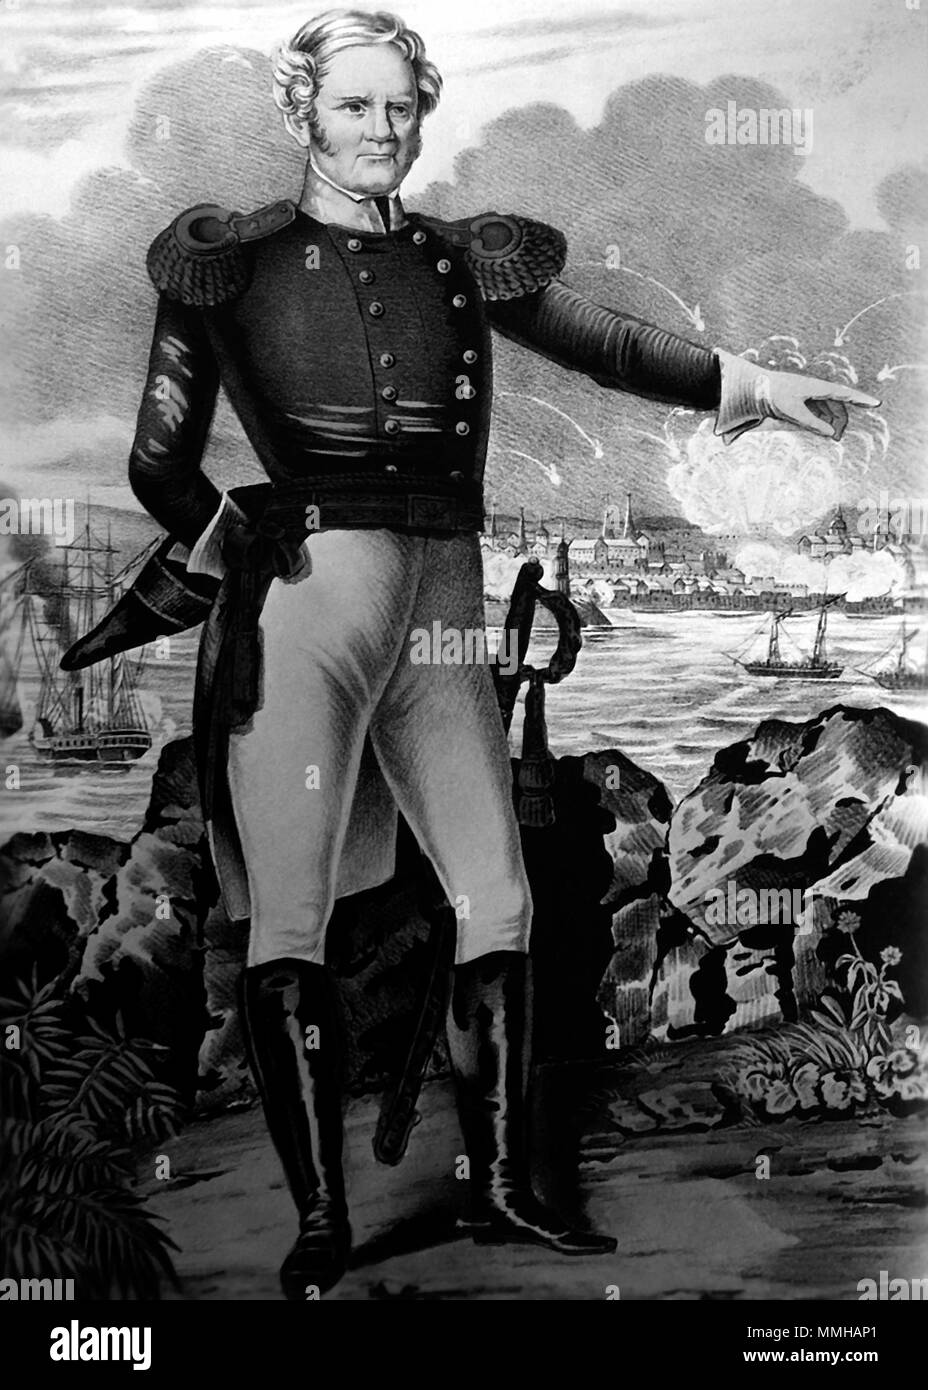 . English: Major General Winfield Scott at Vera Cruz, March 25, 1847. Copy of lithograph by Nathaniel Currier, 1847. NARA FILE #: 111-SC-496992 WAR & CONFLICT BOOK #: 102.  . 25 March 1847.   Nathaniel Currier  (1813–1888)     Alternative names Nat Currier; N. Currier; Nathaniel T. Currier; Currier  Description American painter  Date of birth/death 27 March 1813 20 November 1888  Location of birth/death Roxbury Amesbury  Work location Philadelphia (1833); New York City (1834)  Authority control  : Q6646654 VIAF:?62871001 ISNI:?0000 0000 8388 2969 ULAN:?500115501 LCCN:?n81090785 NLA:?35032737 W Stock Photo